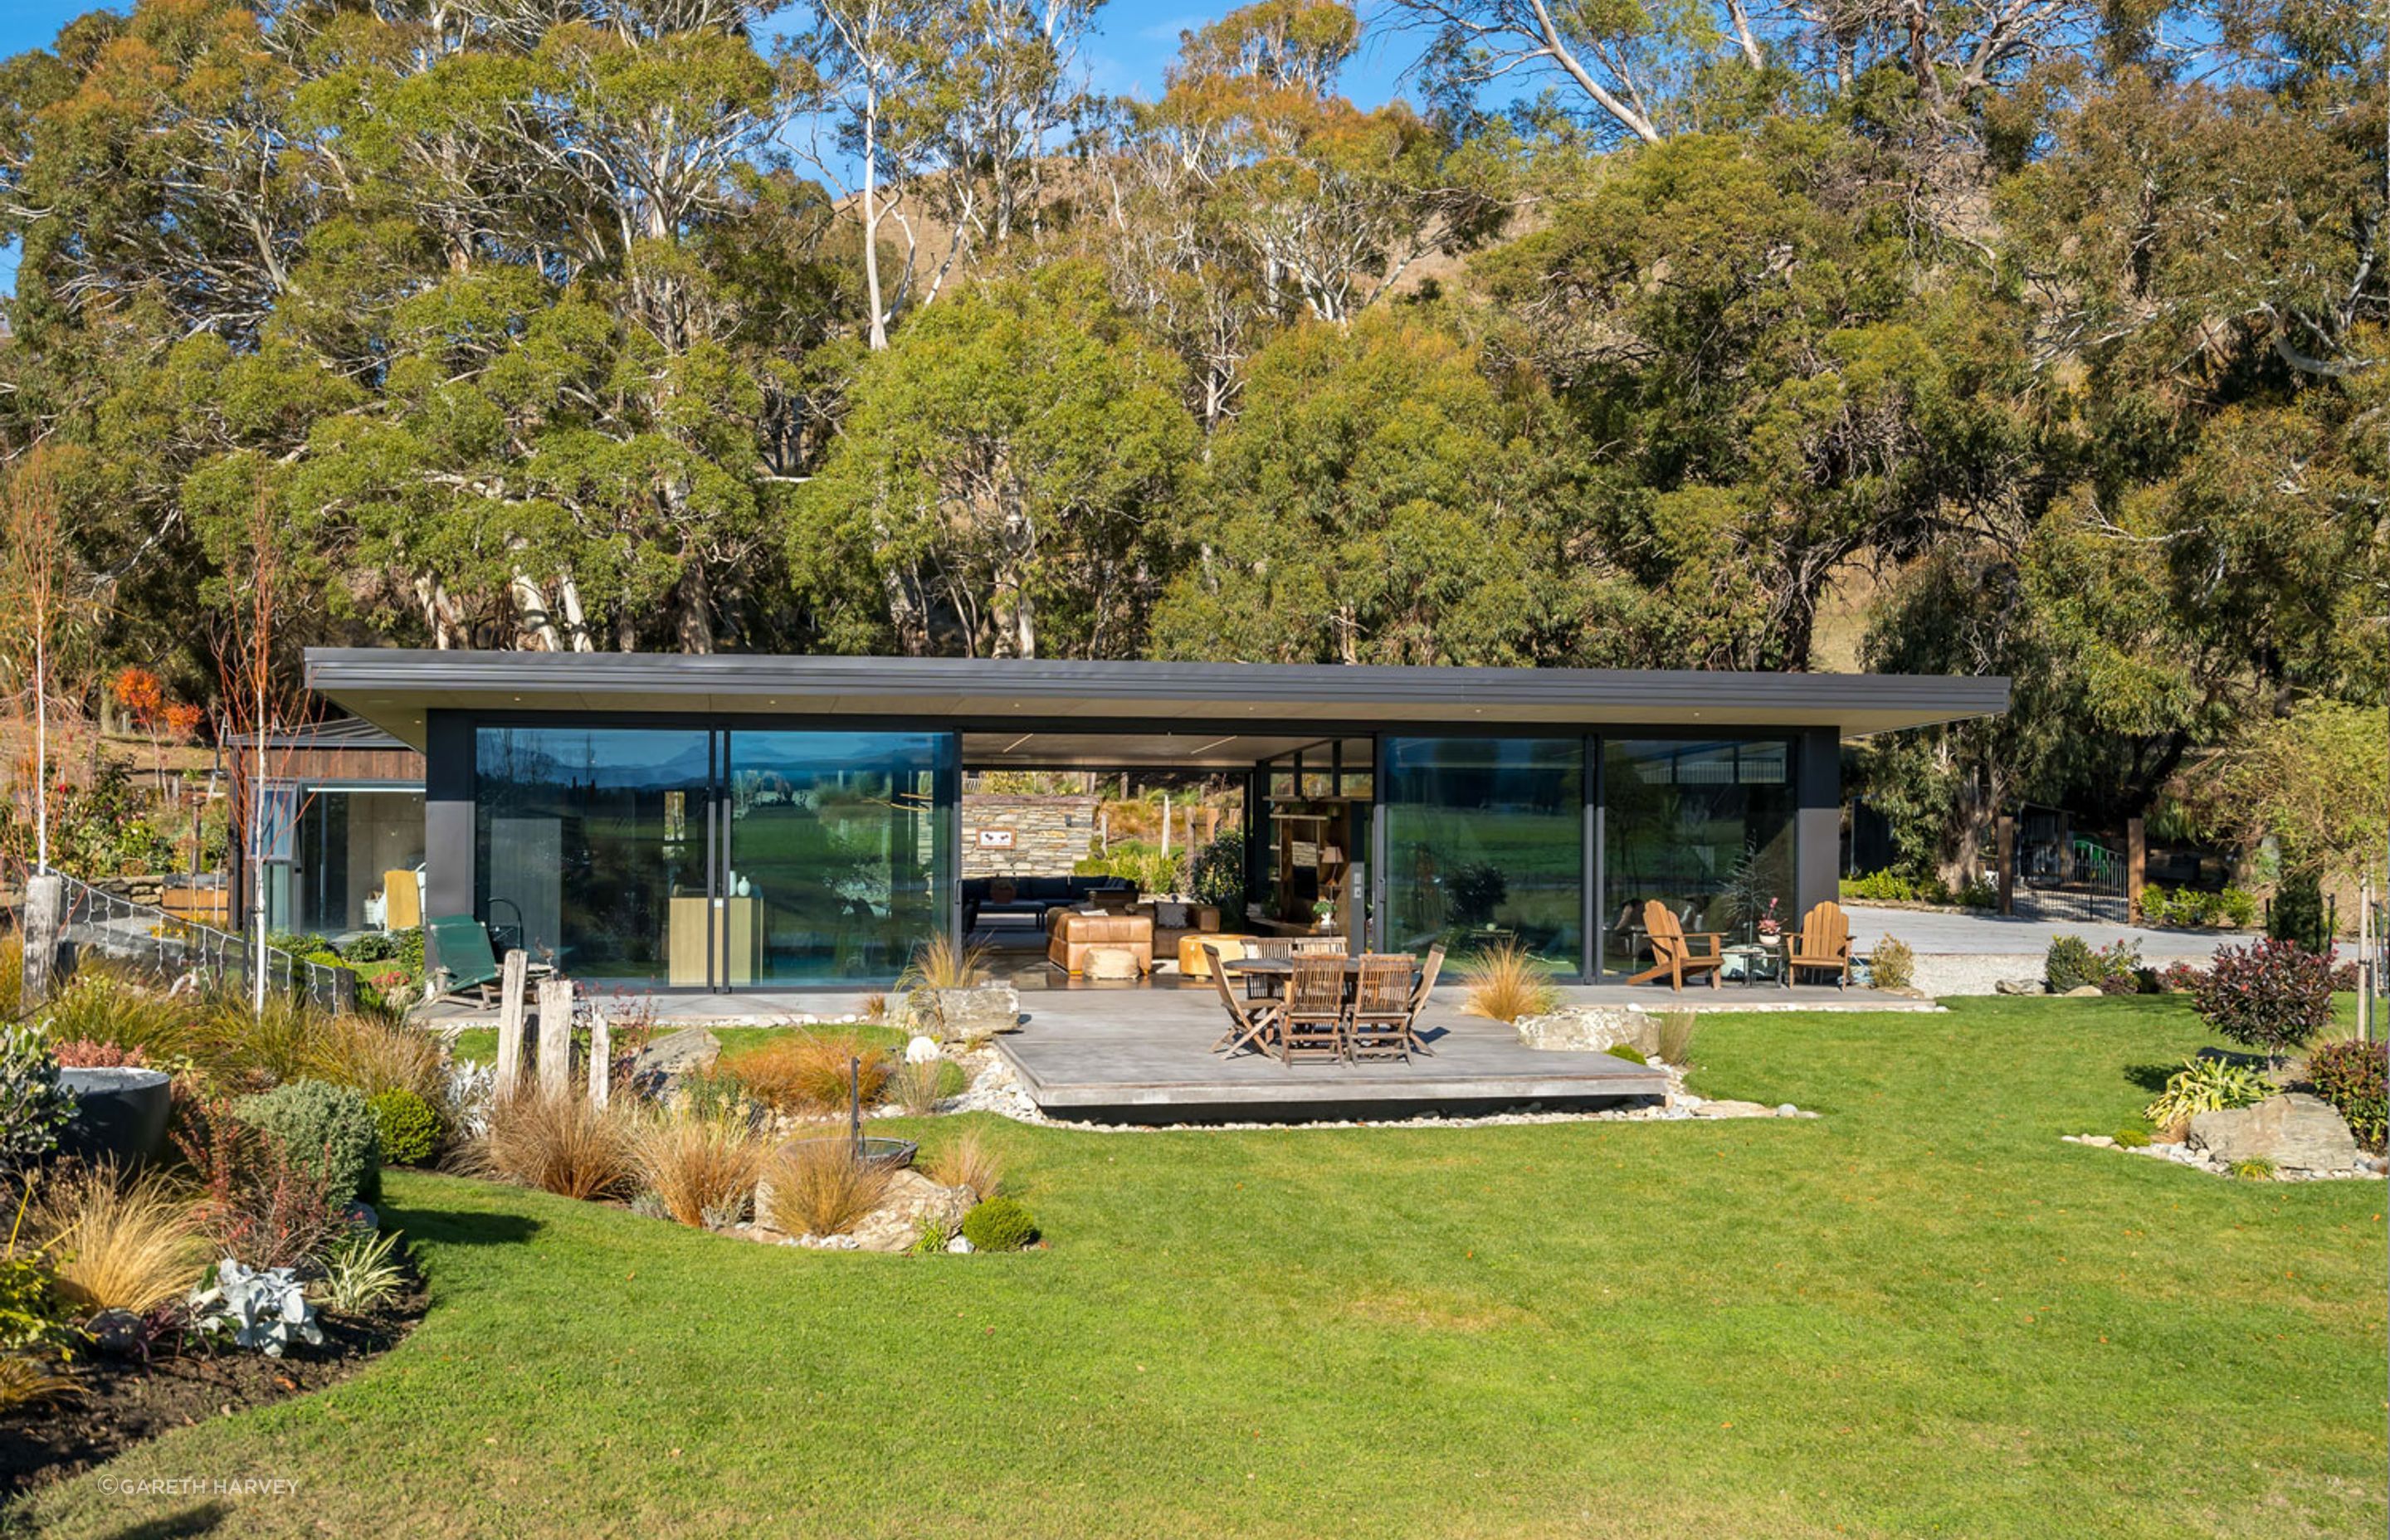 The brief from homeowners Sue and Simon Nyhof was for strong indoor-outdoor flow and lots of glass, and that the home be energy efficient. Gary credits builder Paul Davidson for his part in the collaboration: “Nothing was a problem.”